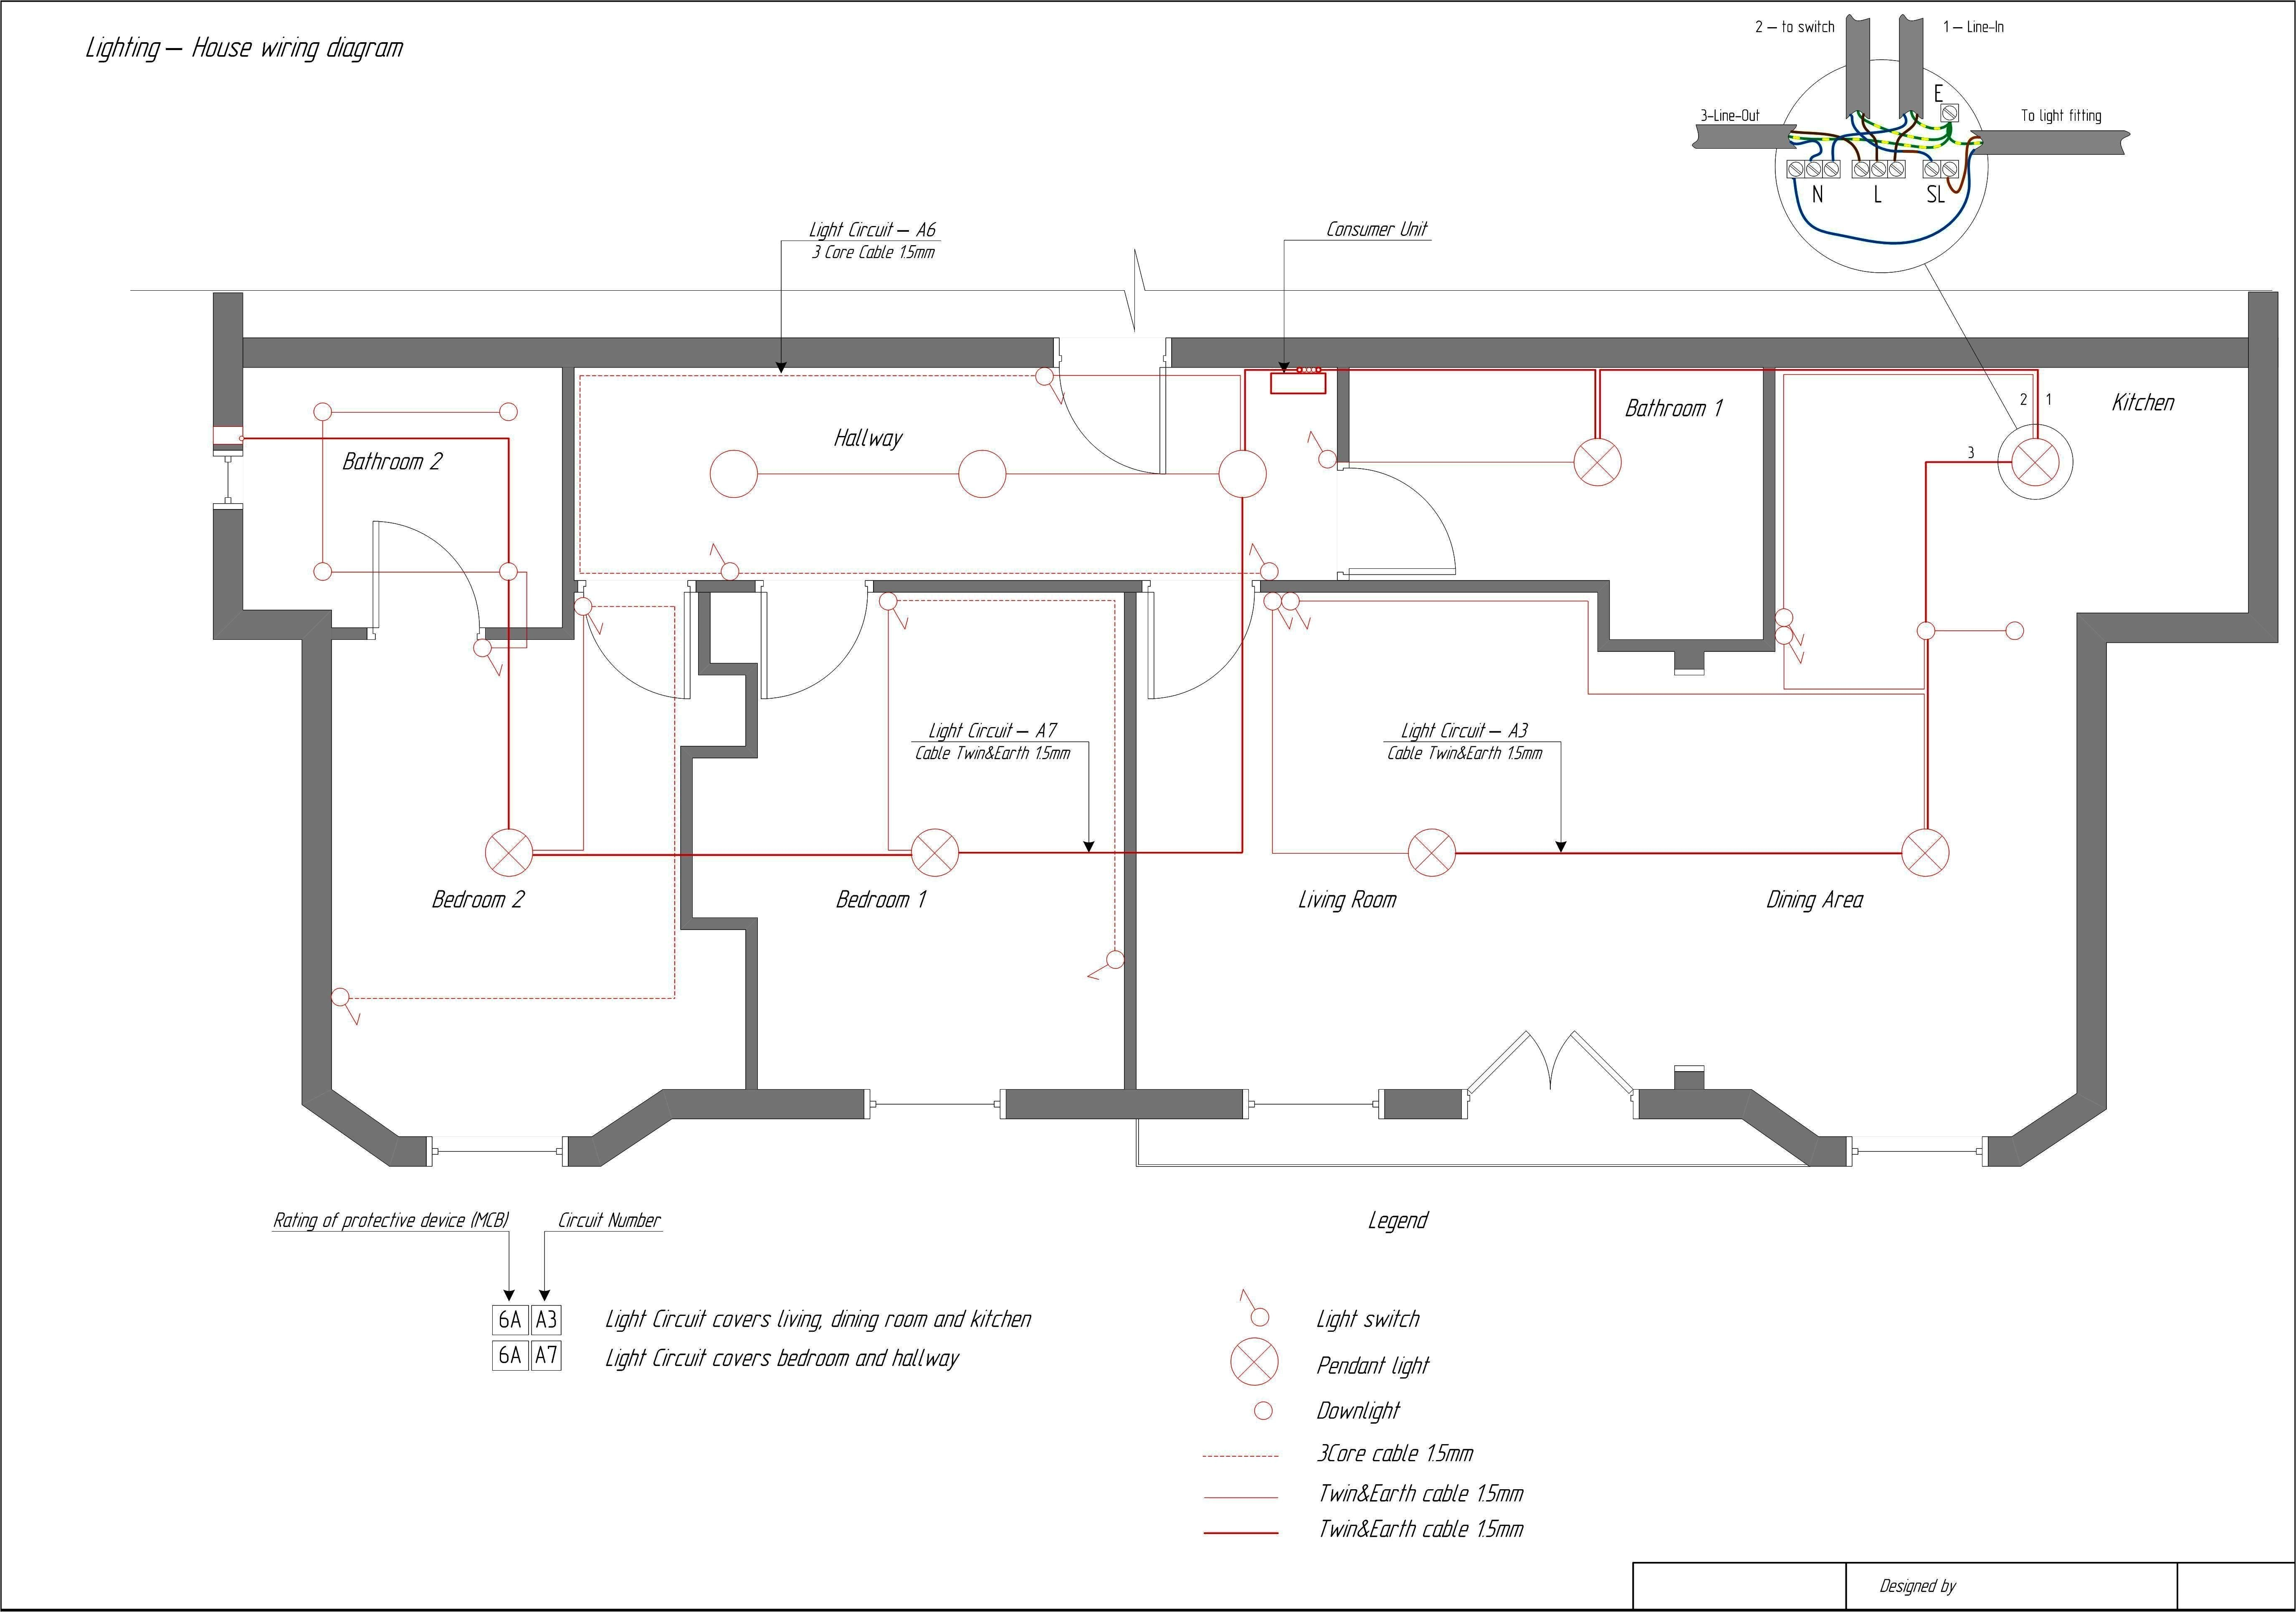 home wiring layout schema diagram databasehome wiring layout database wiring diagram home electrical wiring layout home